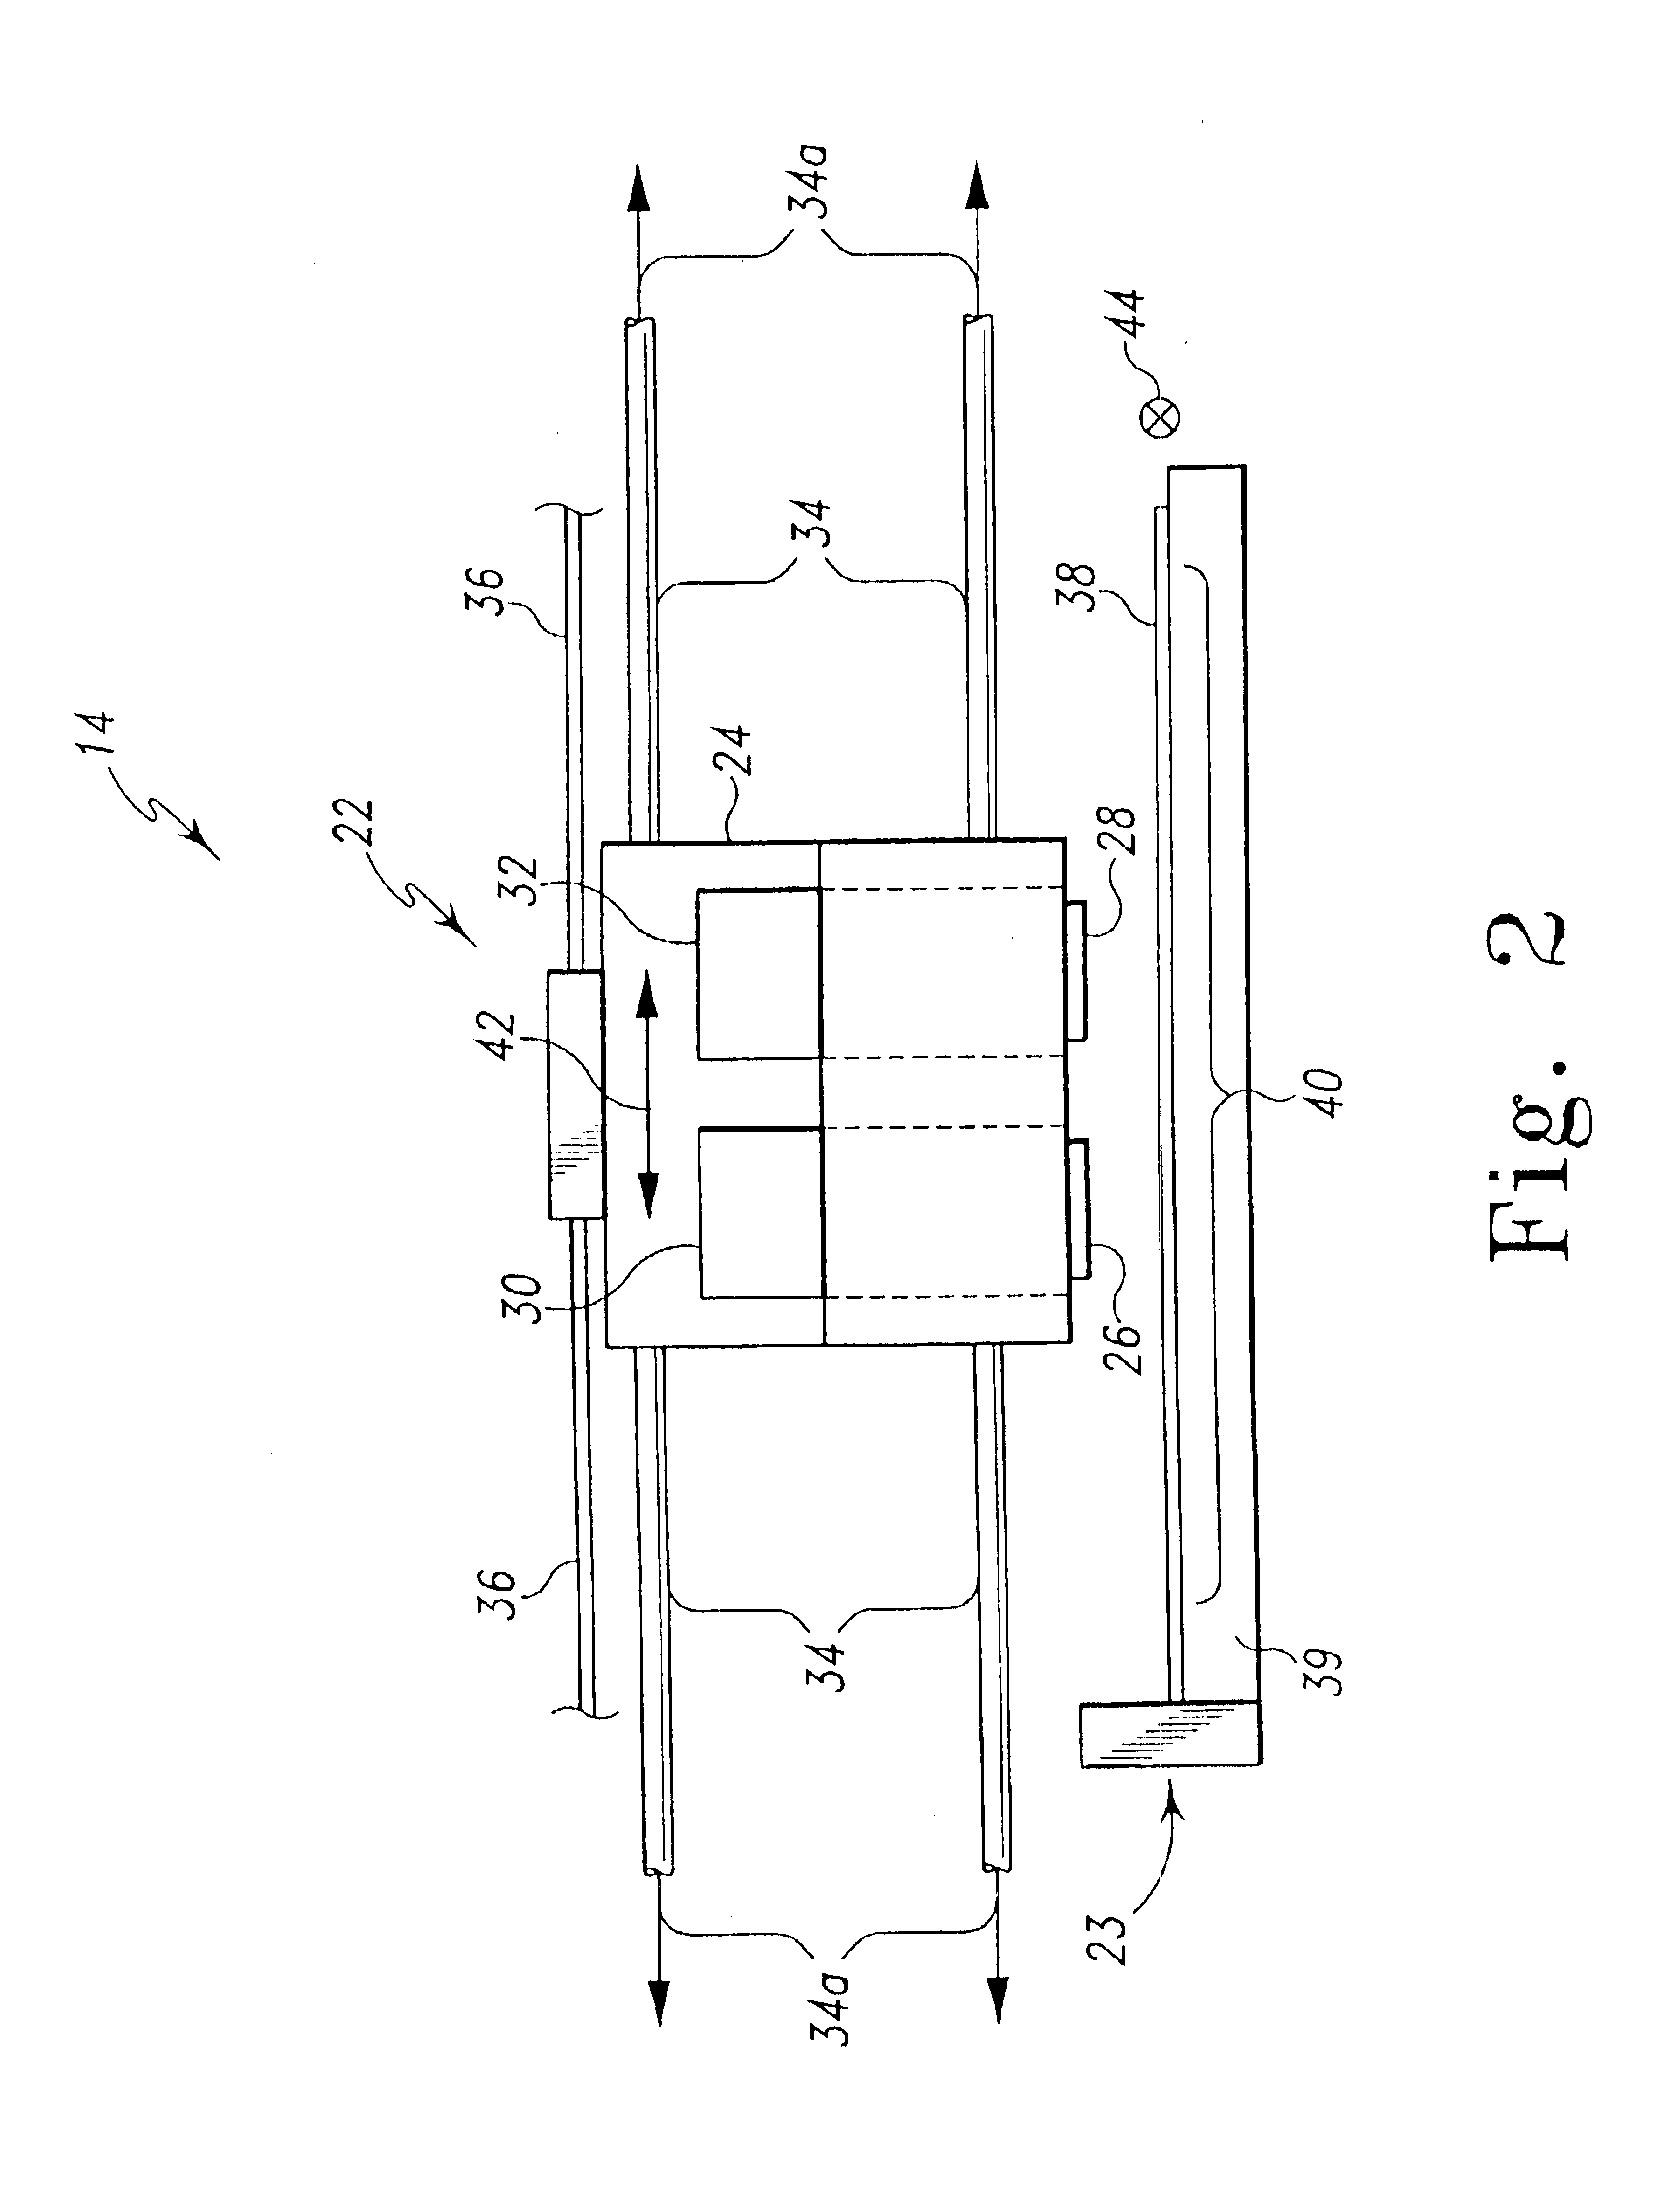 Subcovered printing mode for a printhead with multiple sized ejectors